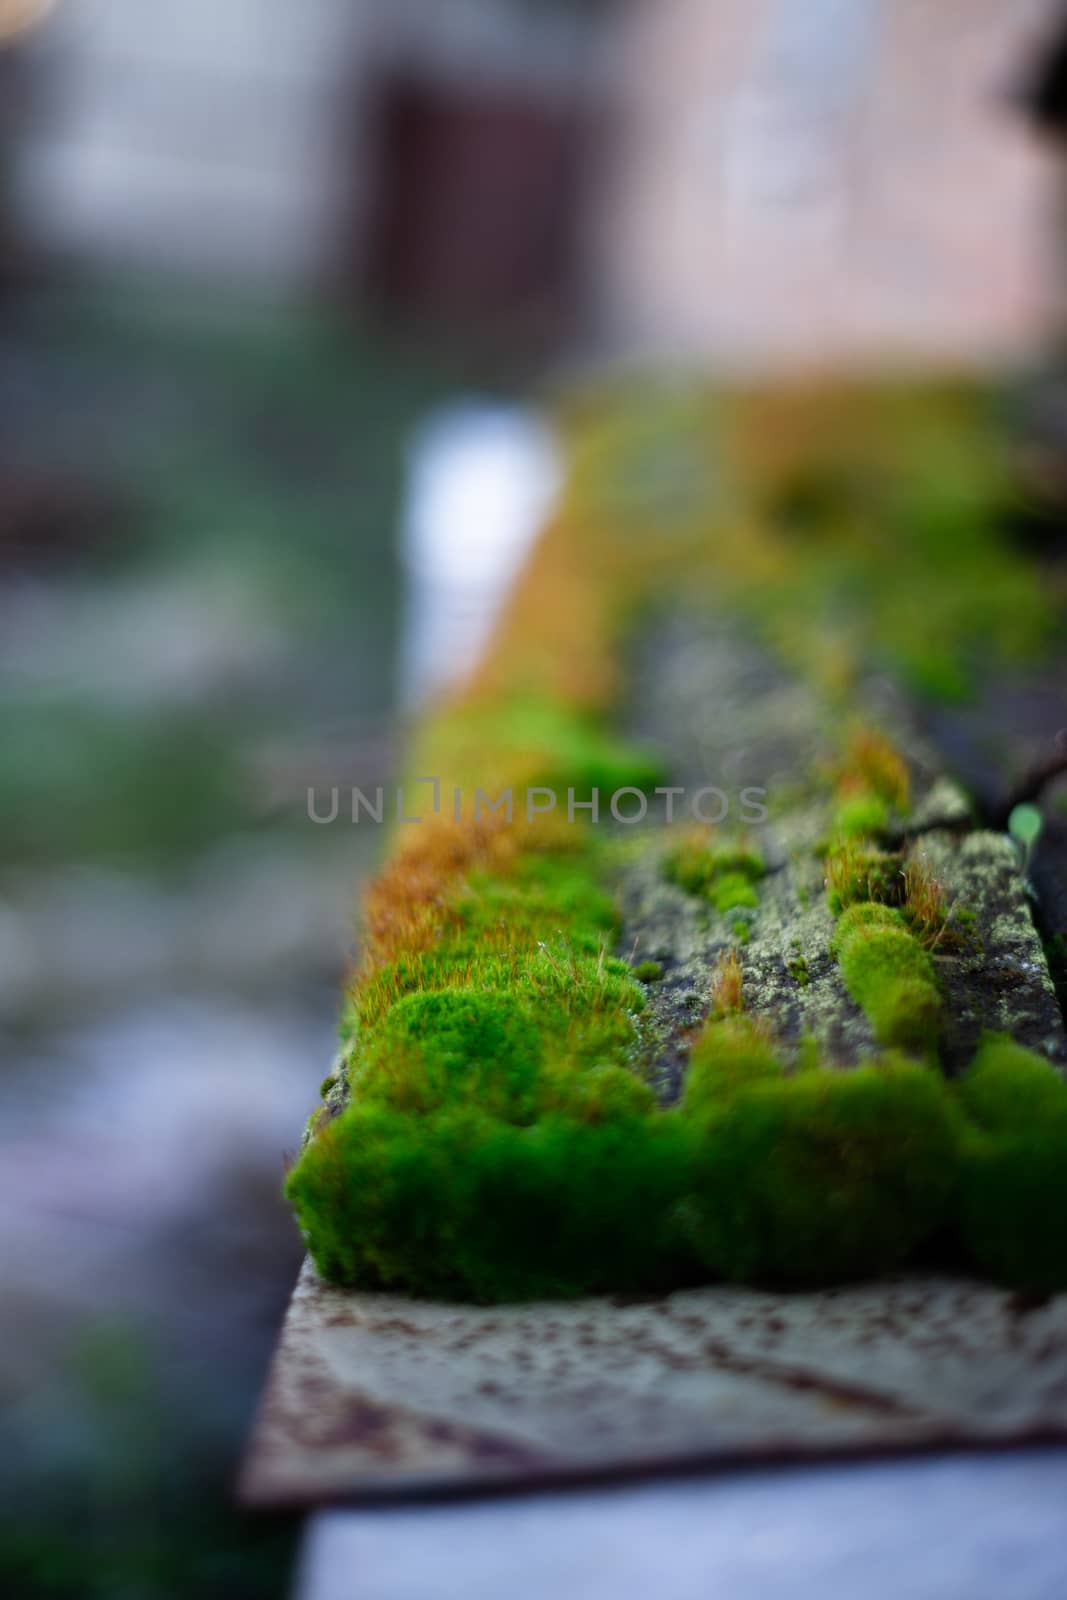 Hue green moss on wood bench surface. Wet wood and soft moss. Blurred background. Soft focus. by alexsdriver